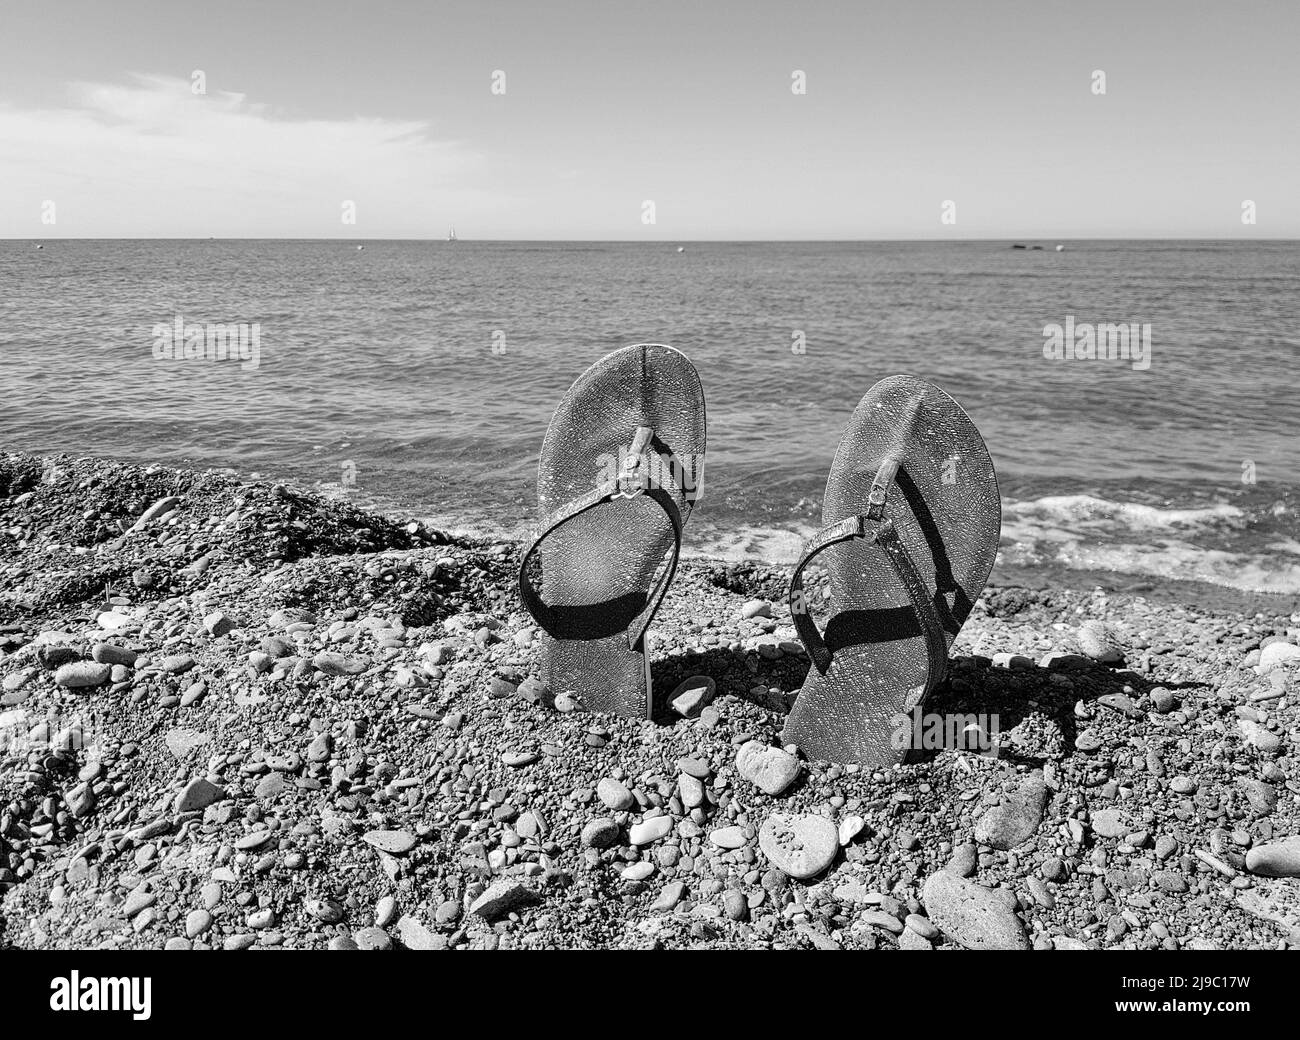 Black and white photo, women's beach shoes standing on a pebble against ...